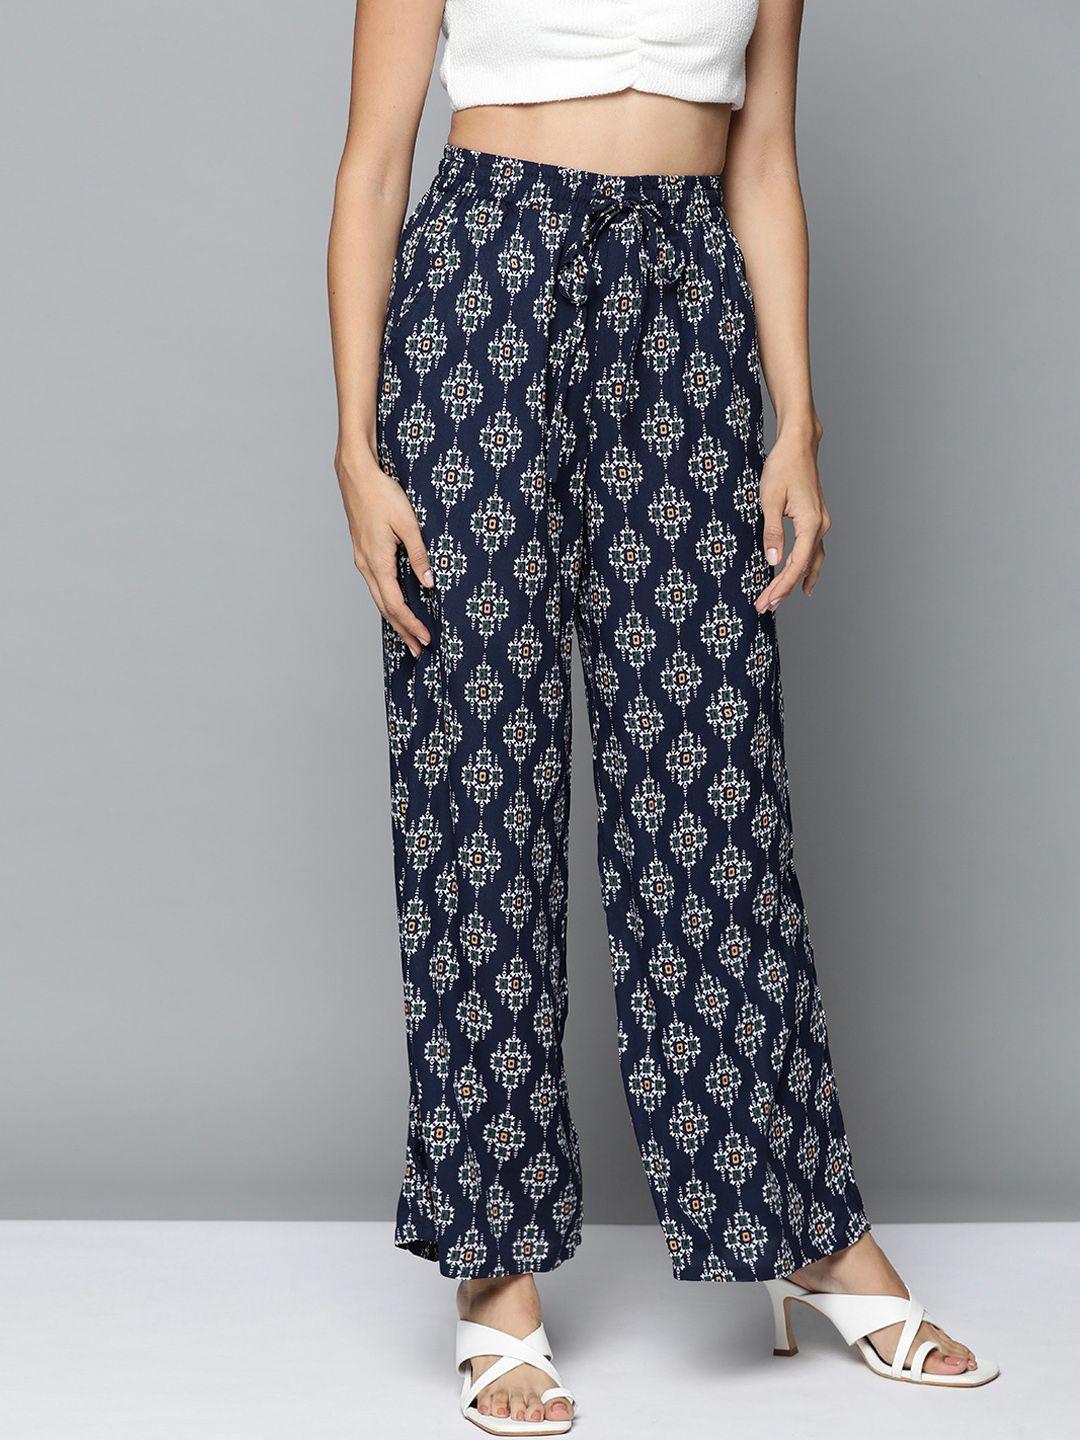 here&now women navy blue & off white ethnic motifs print palazzos